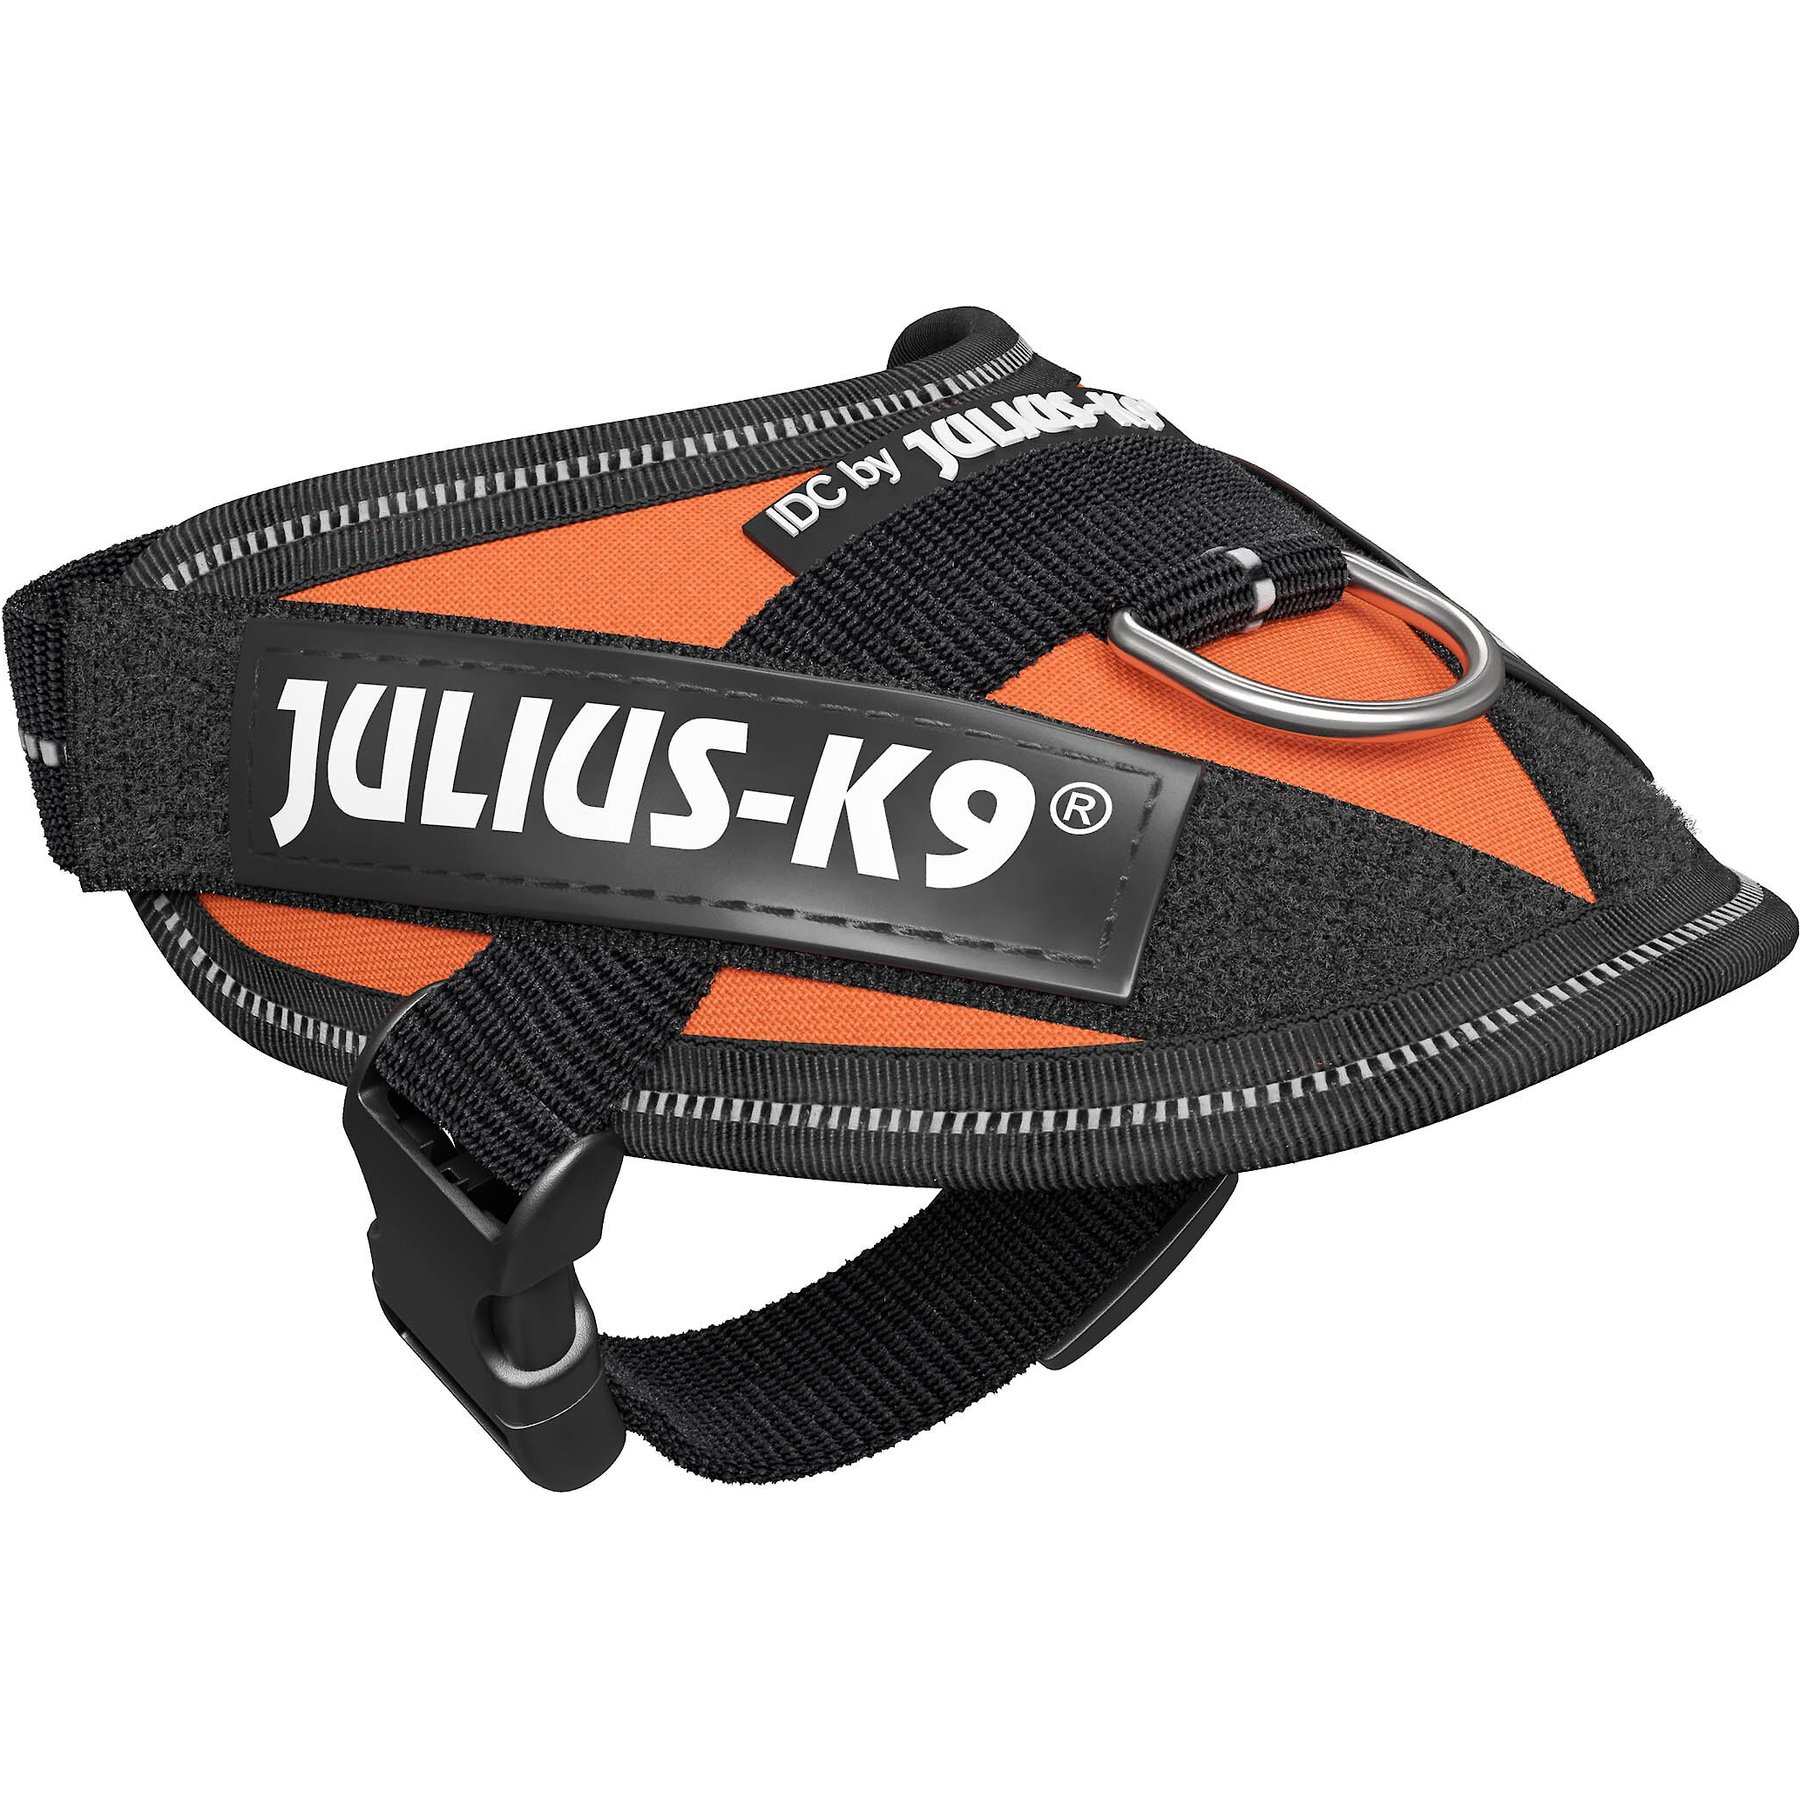 Try Tickless with the best Julius-K9 IDC Powerharnesses in the